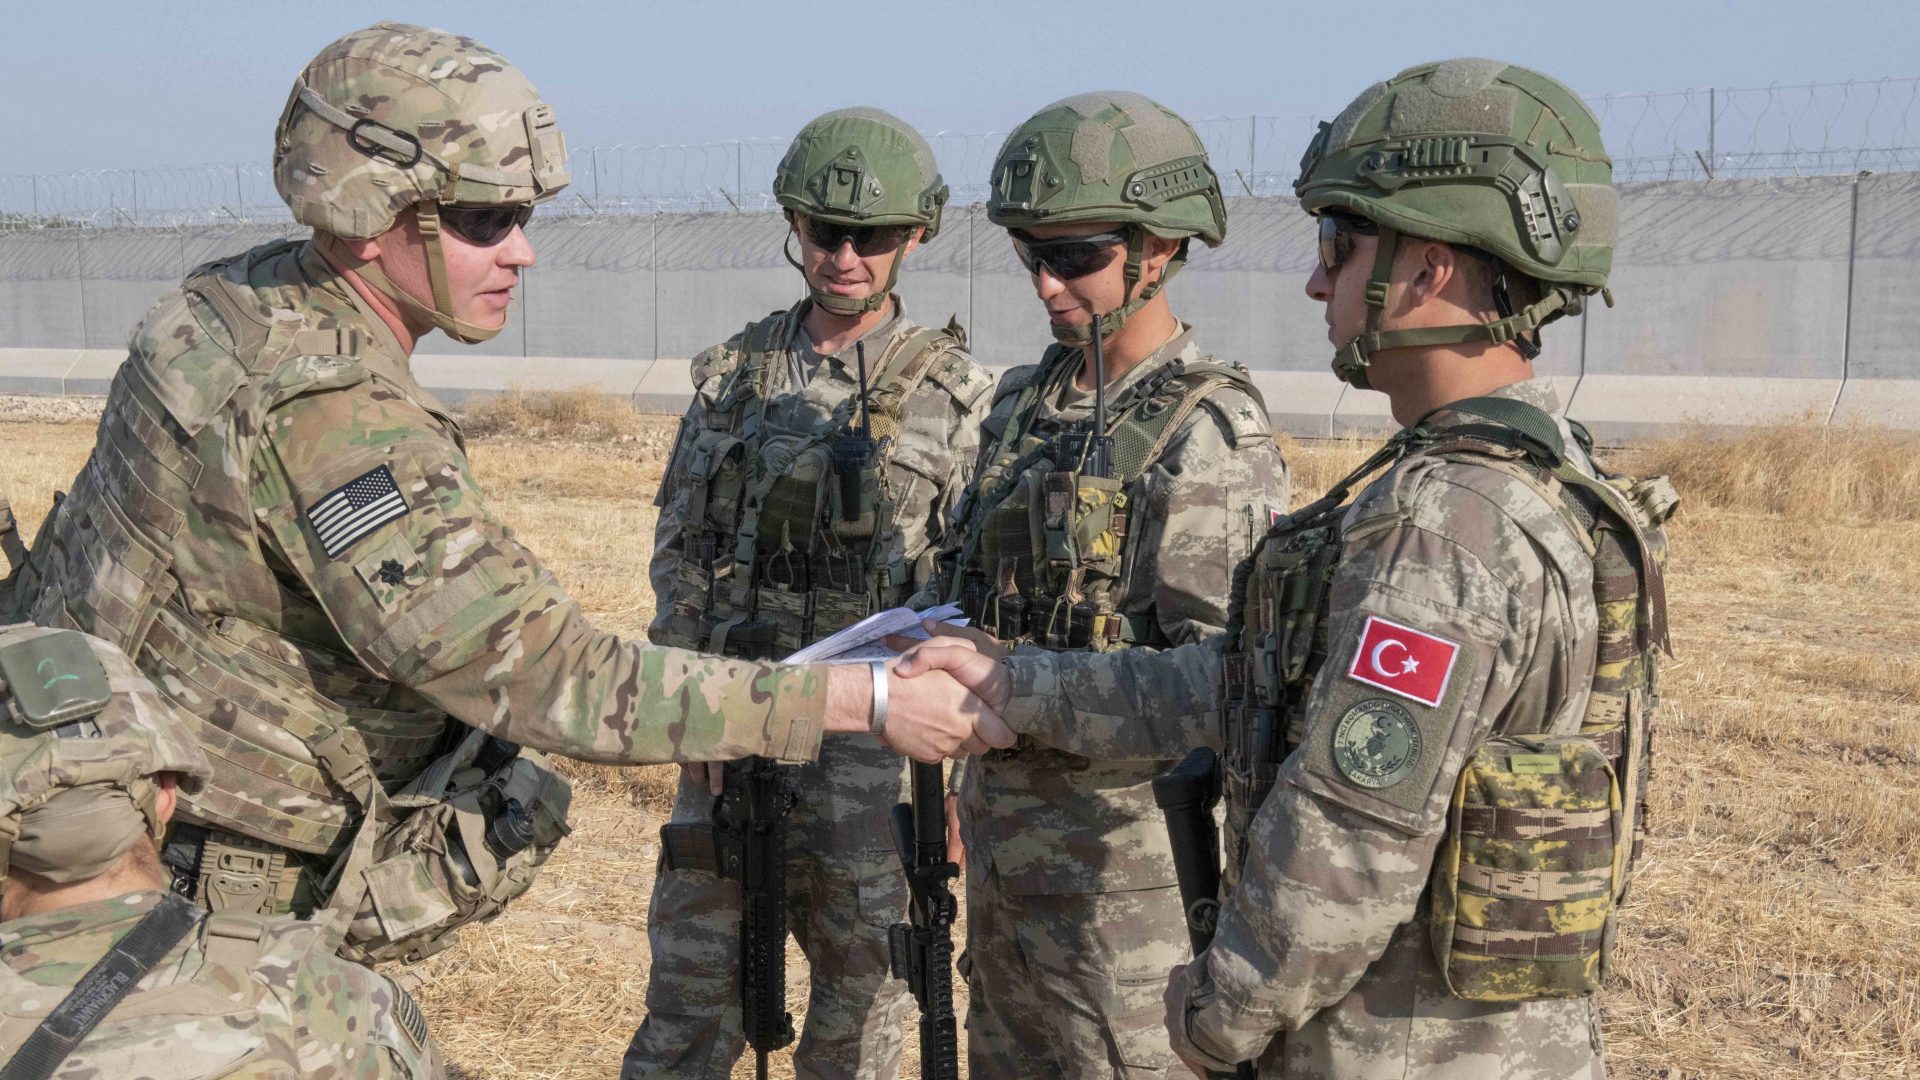 U.S. allies in the Syrian Democratic Forces say the White House's decision to pull troops from the Syria-Turkey border has left them without hope. Here, a U.S. soldier is seen during a joint patrol with Turkish troops on Friday.